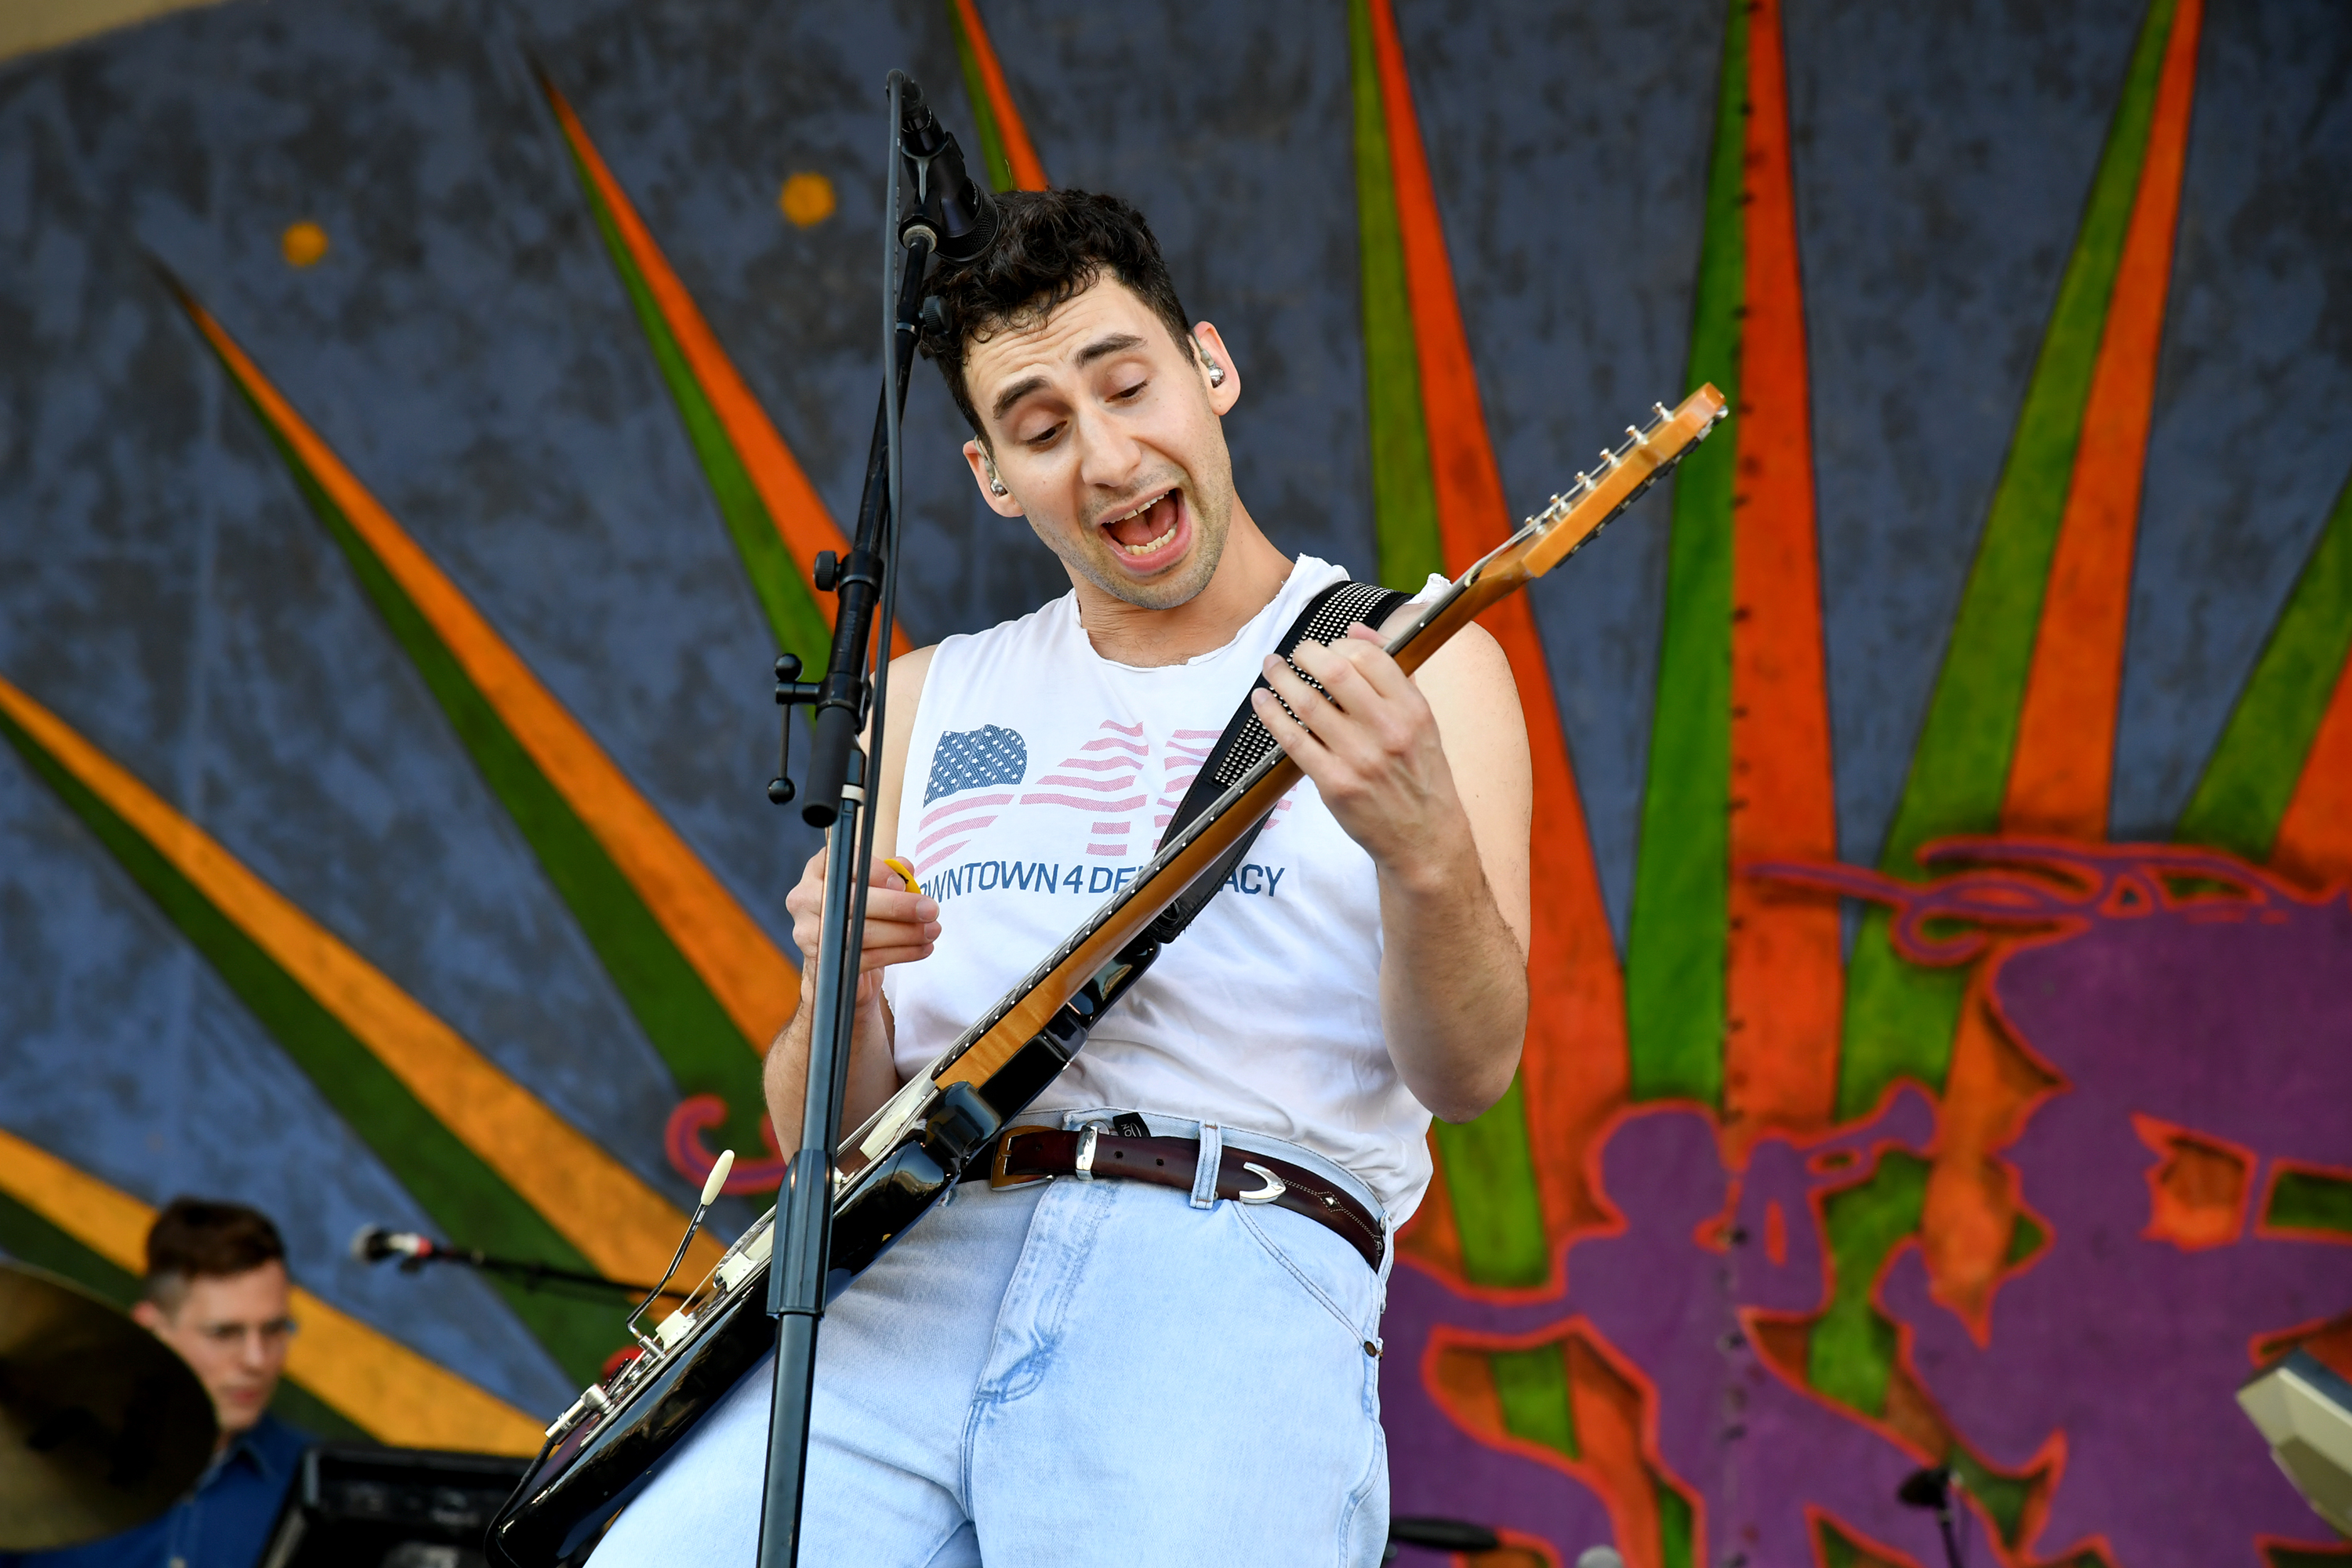 Jack Antonoff Net Worth Soars - A Look At His Musical Fortune